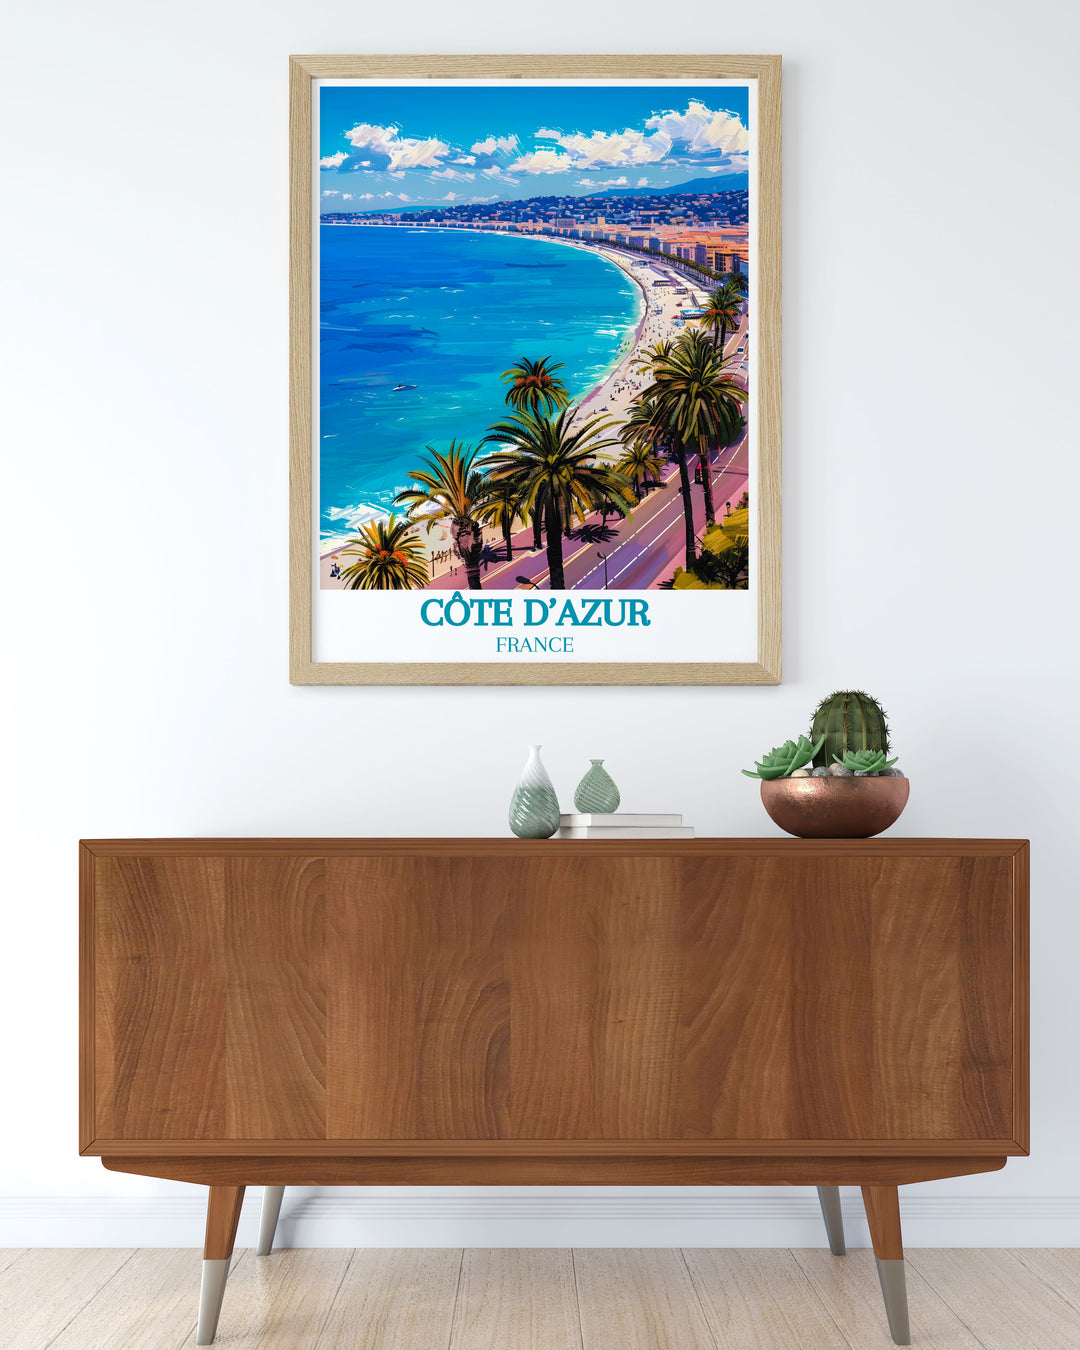 Modern wall decor showcasing the stunning scenery of the Promenade des Anglais in Nice, Côte dAzur, France. This print features the charming boulevard, clear Mediterranean waters, and grand hotels, bringing the beauty of the French Riviera into your living space.